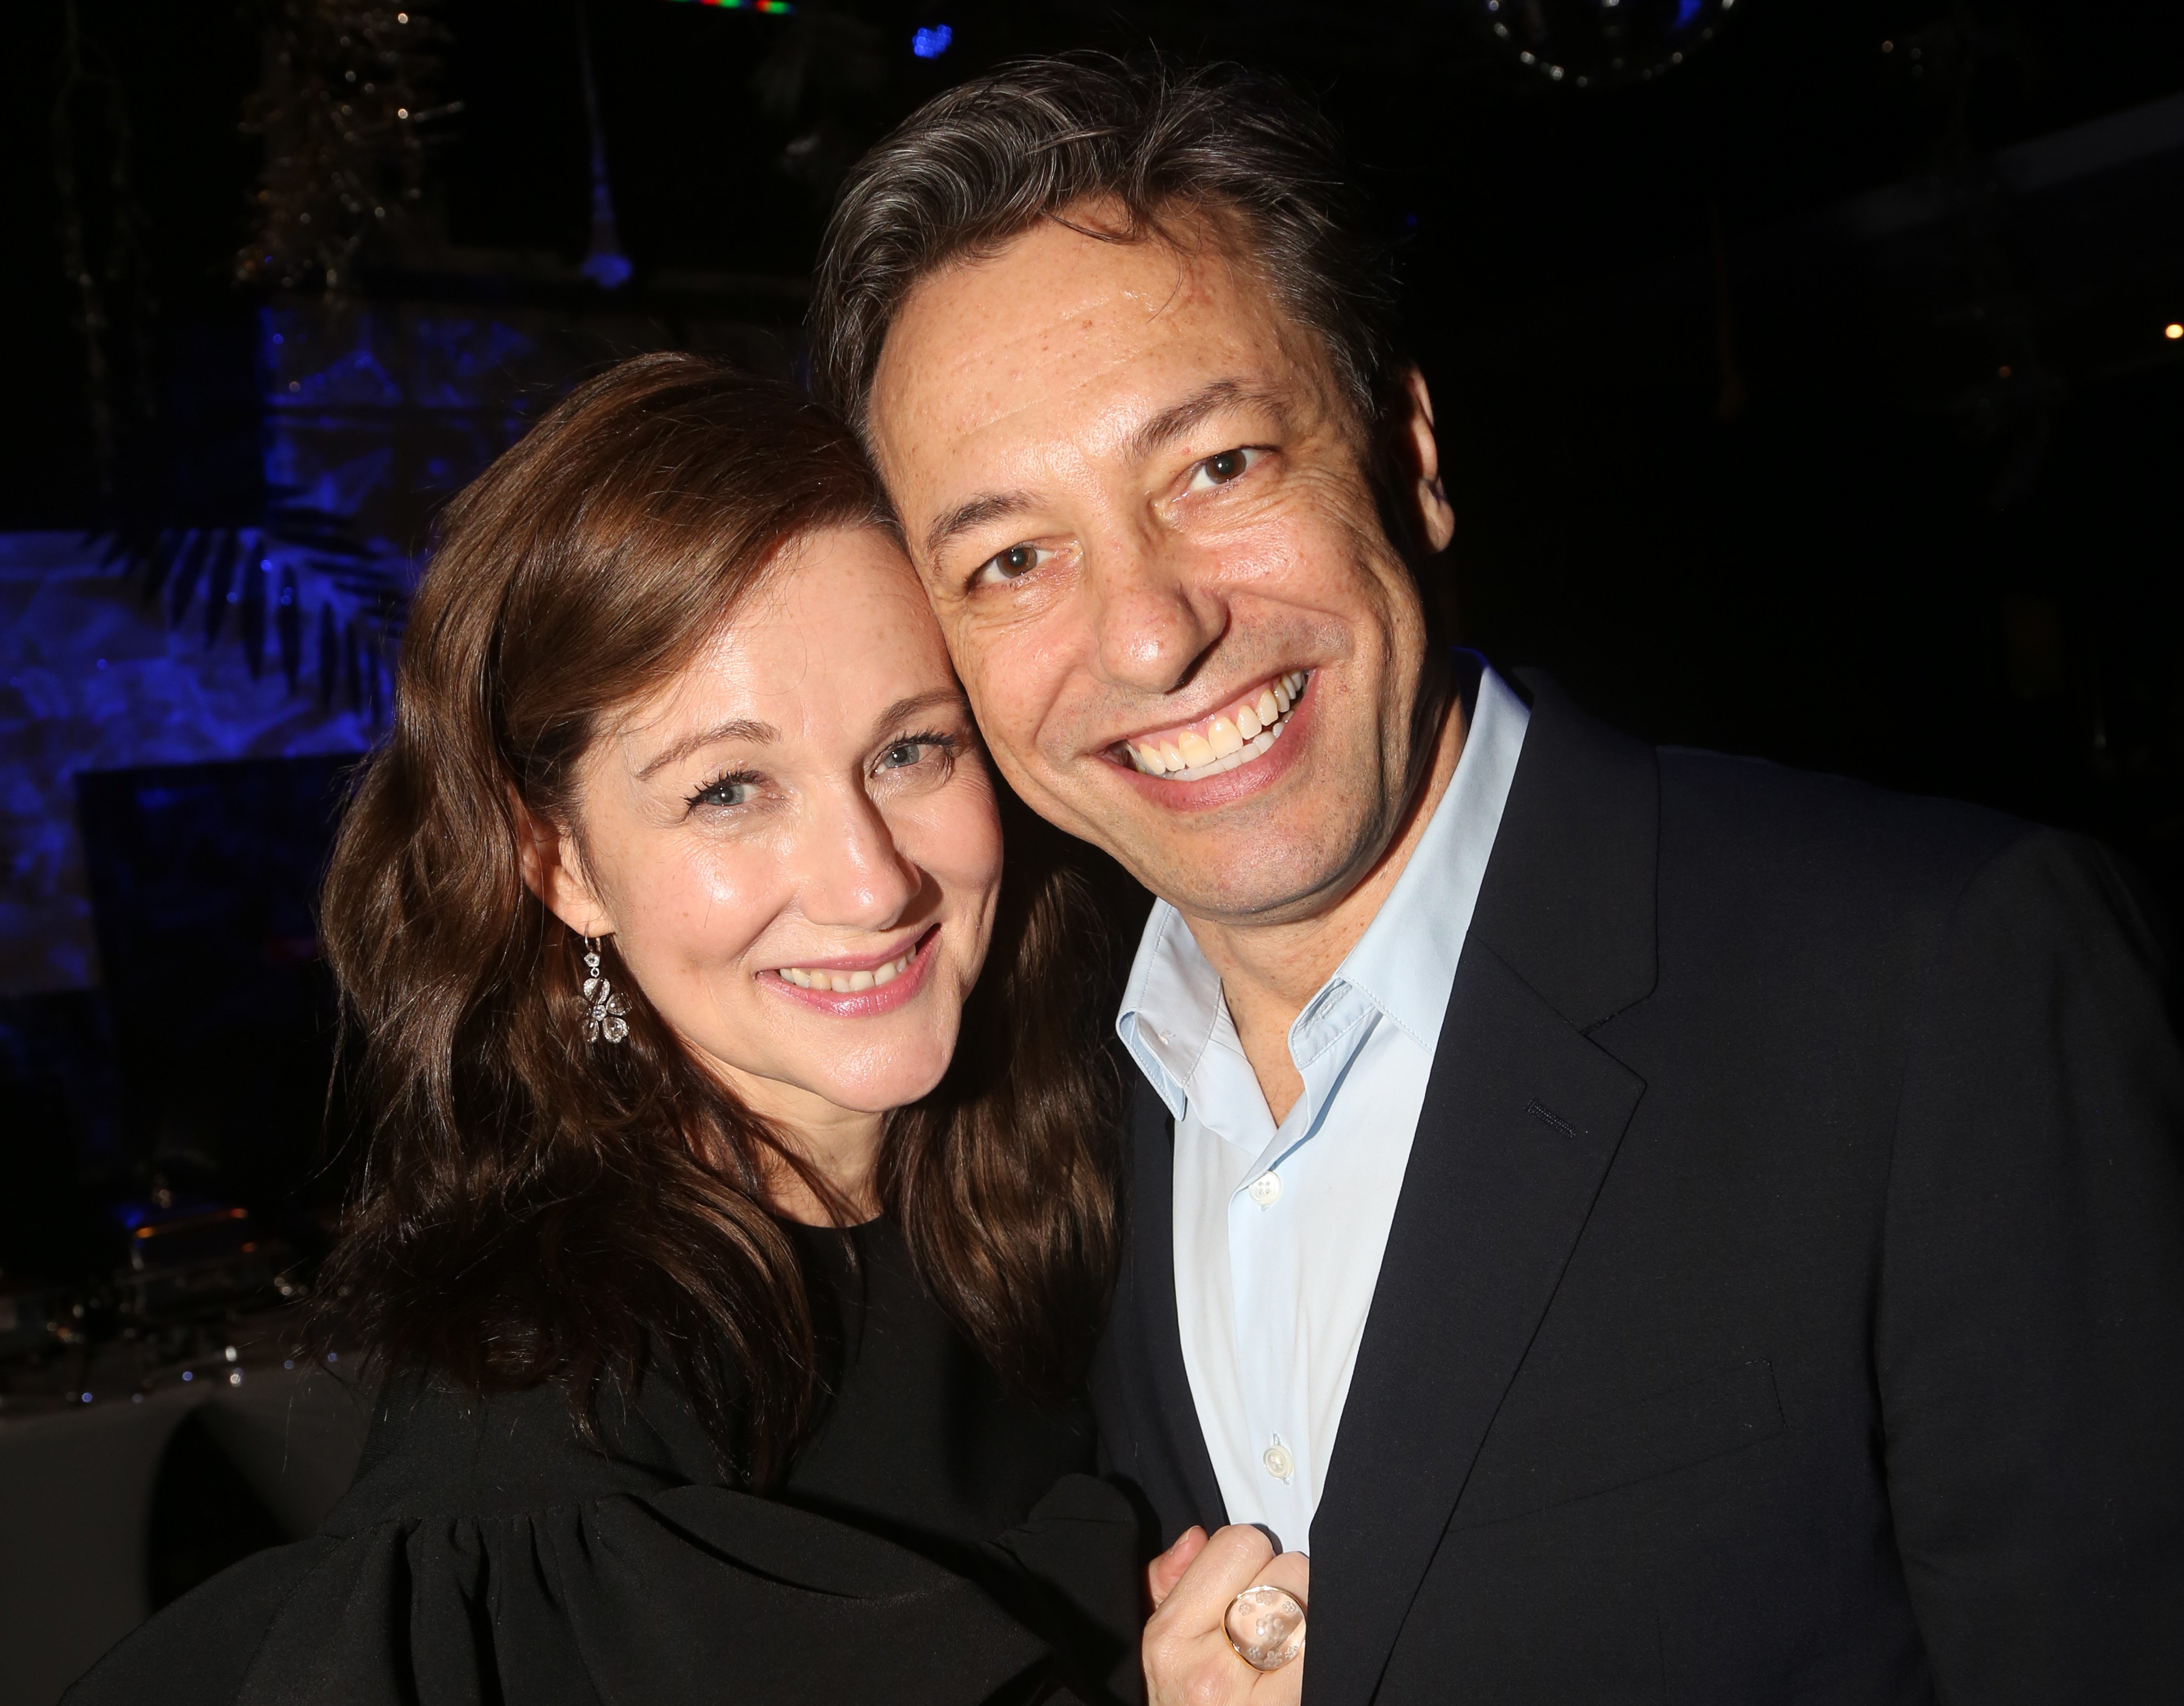 Laura Linney and Marc Schauer at the opening night after party for "My Name Is Lucy Barton" on Broadway at The Copacabana on January 15, 2020 in New York City. / Source: Getty Images